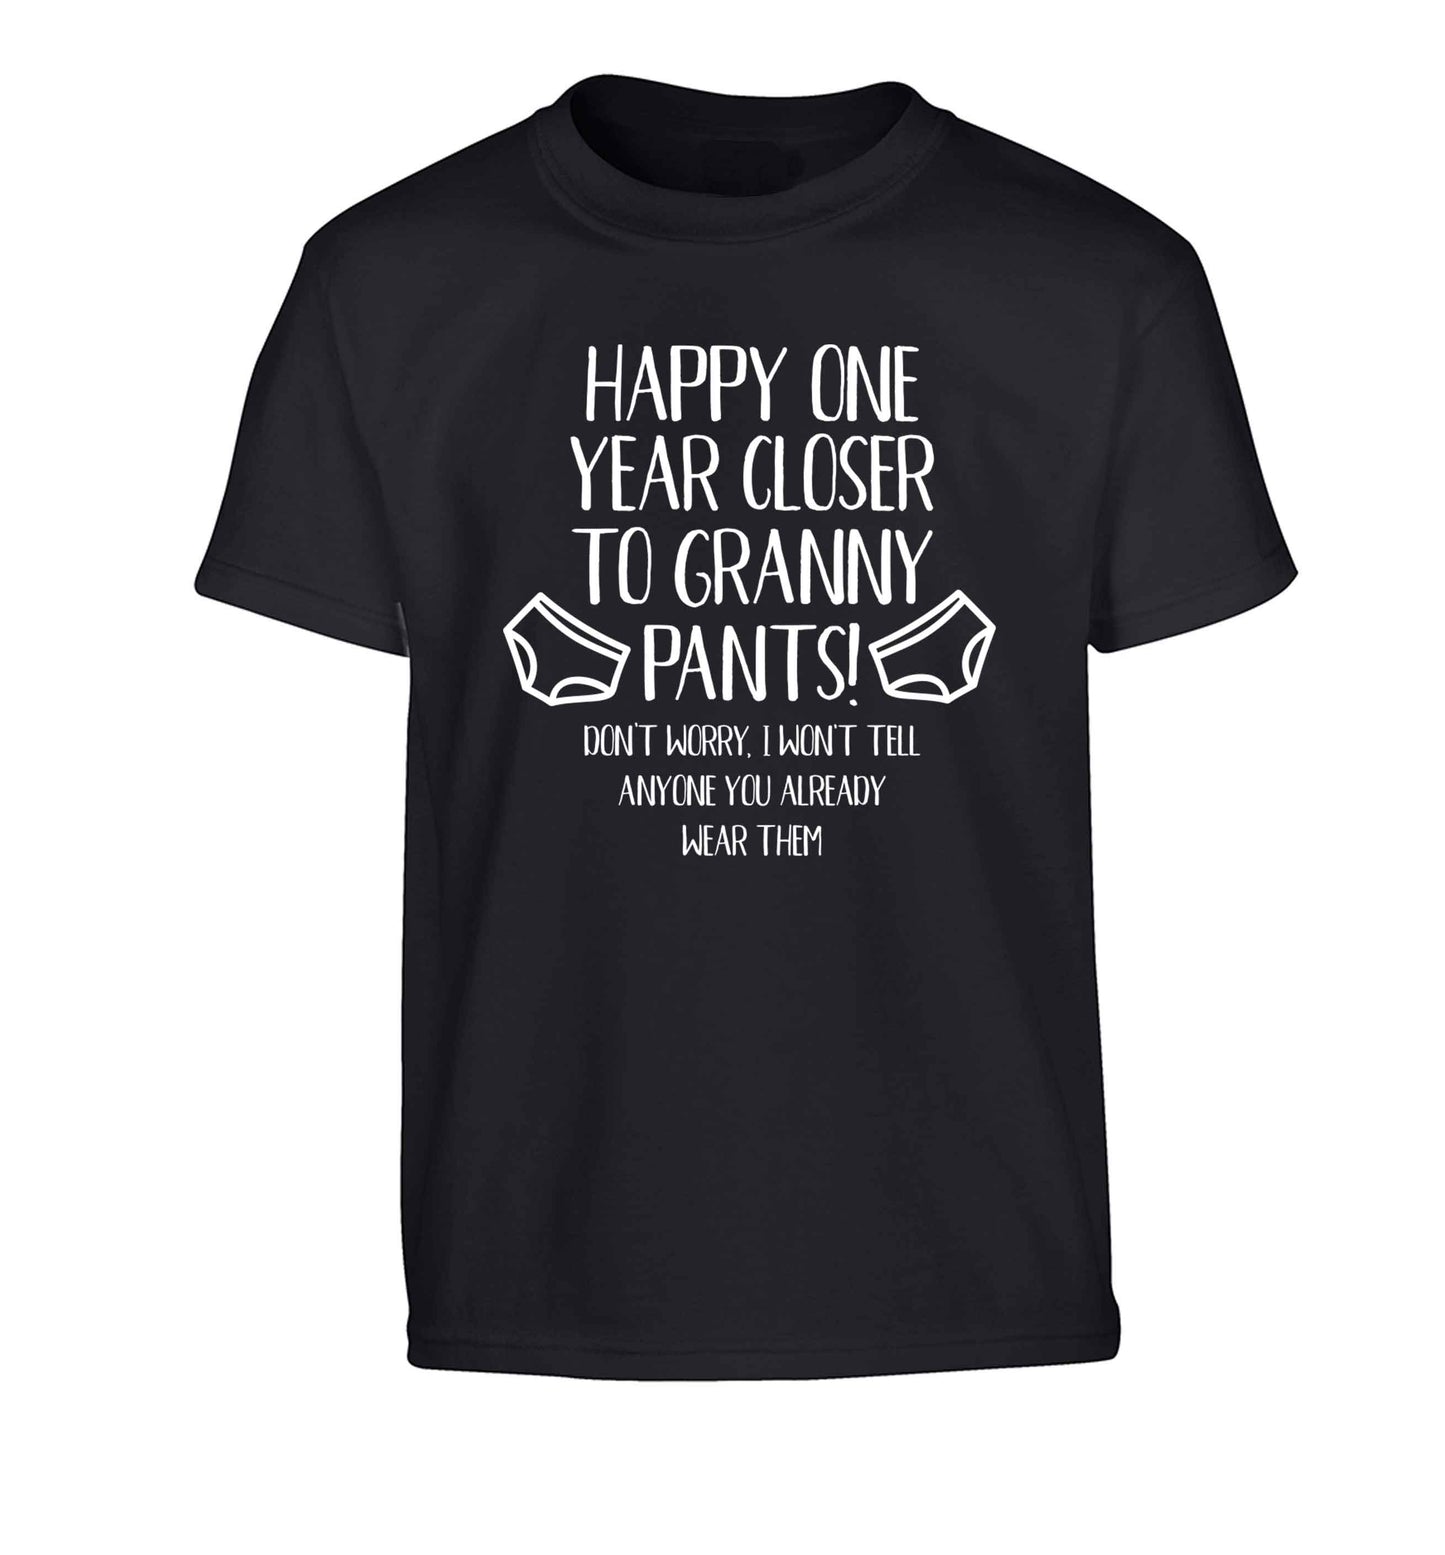 Happy one year closer to granny pants Children's black Tshirt 12-13 Years